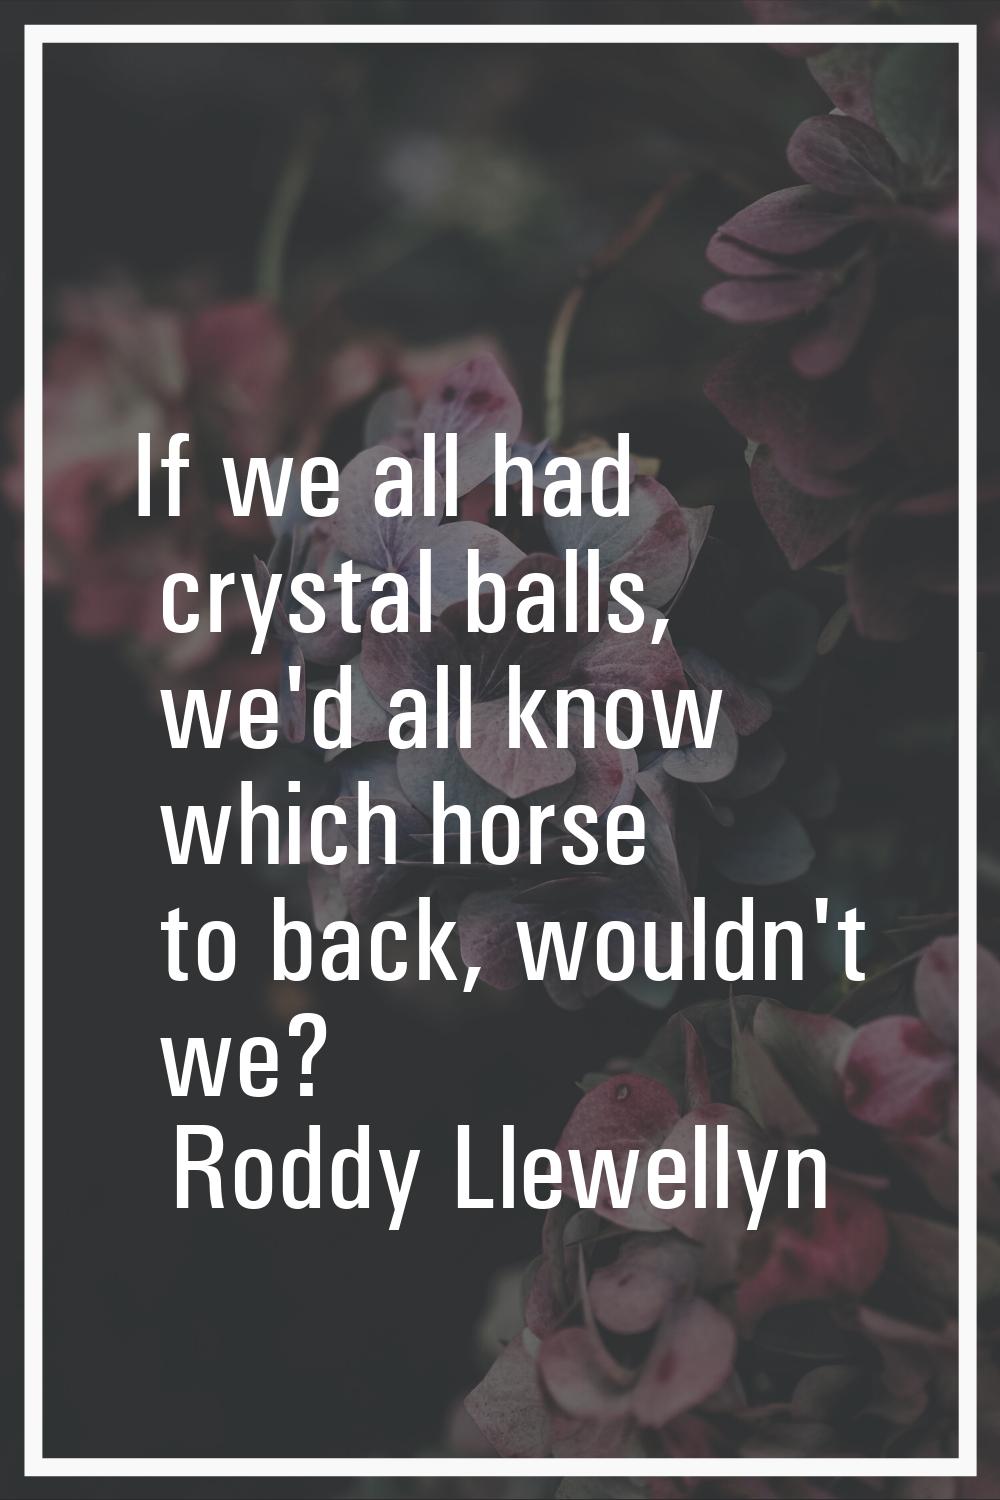 If we all had crystal balls, we'd all know which horse to back, wouldn't we?